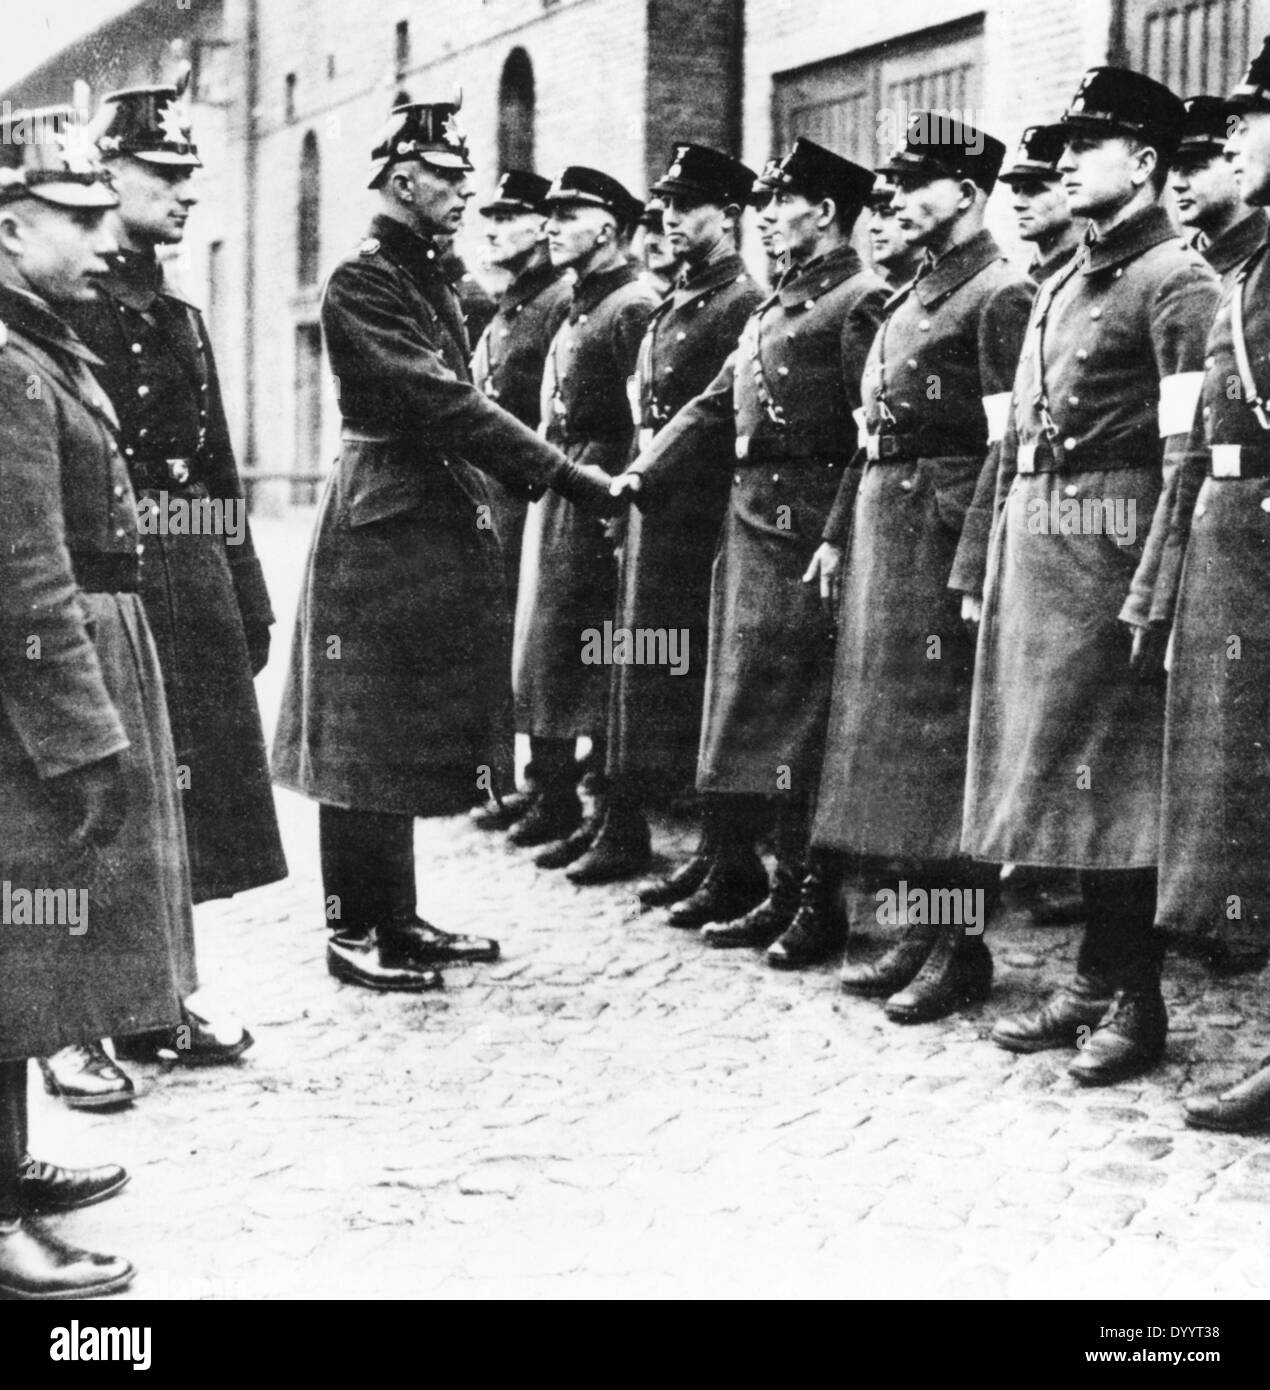 SS ans SA men during their swearing in as police constables, 1933 Stock Photo